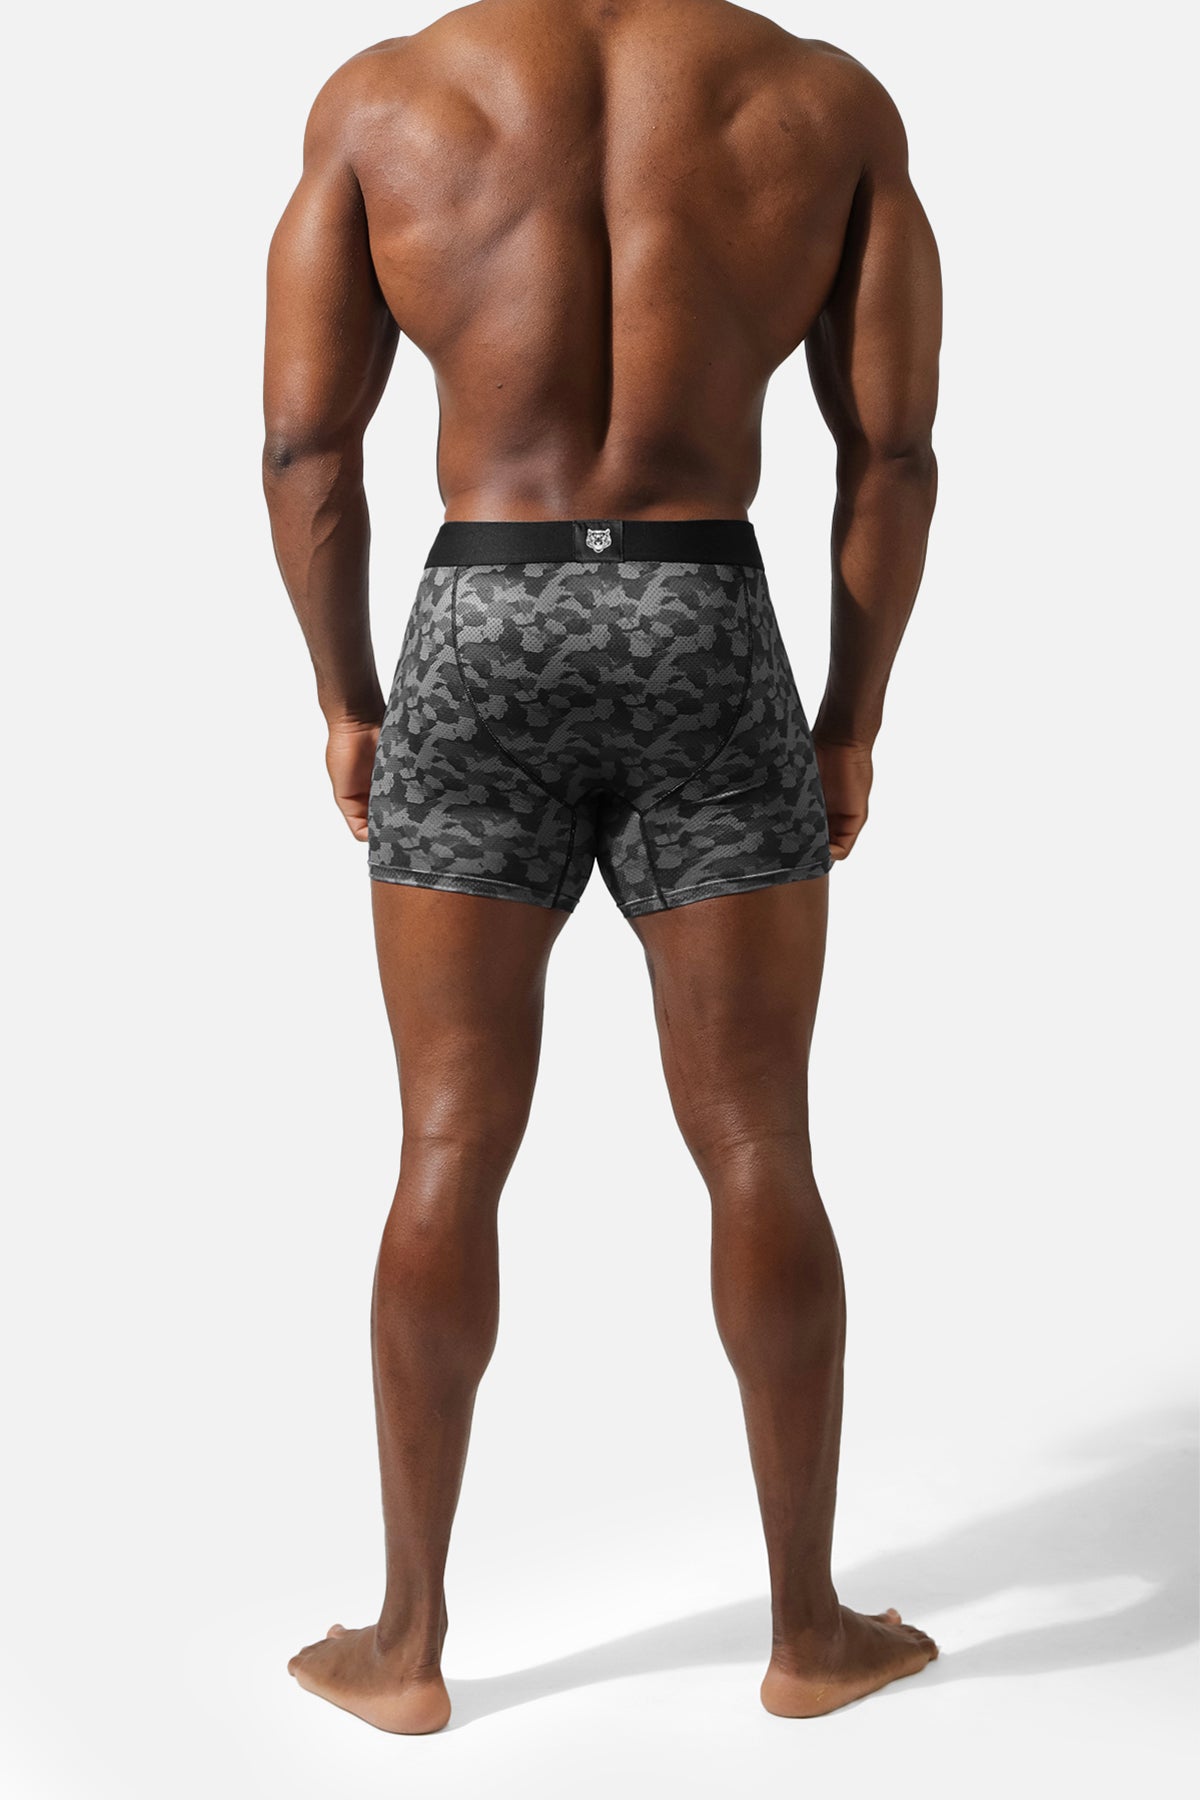 The New Men's Seamless Compression Collection – Jed North